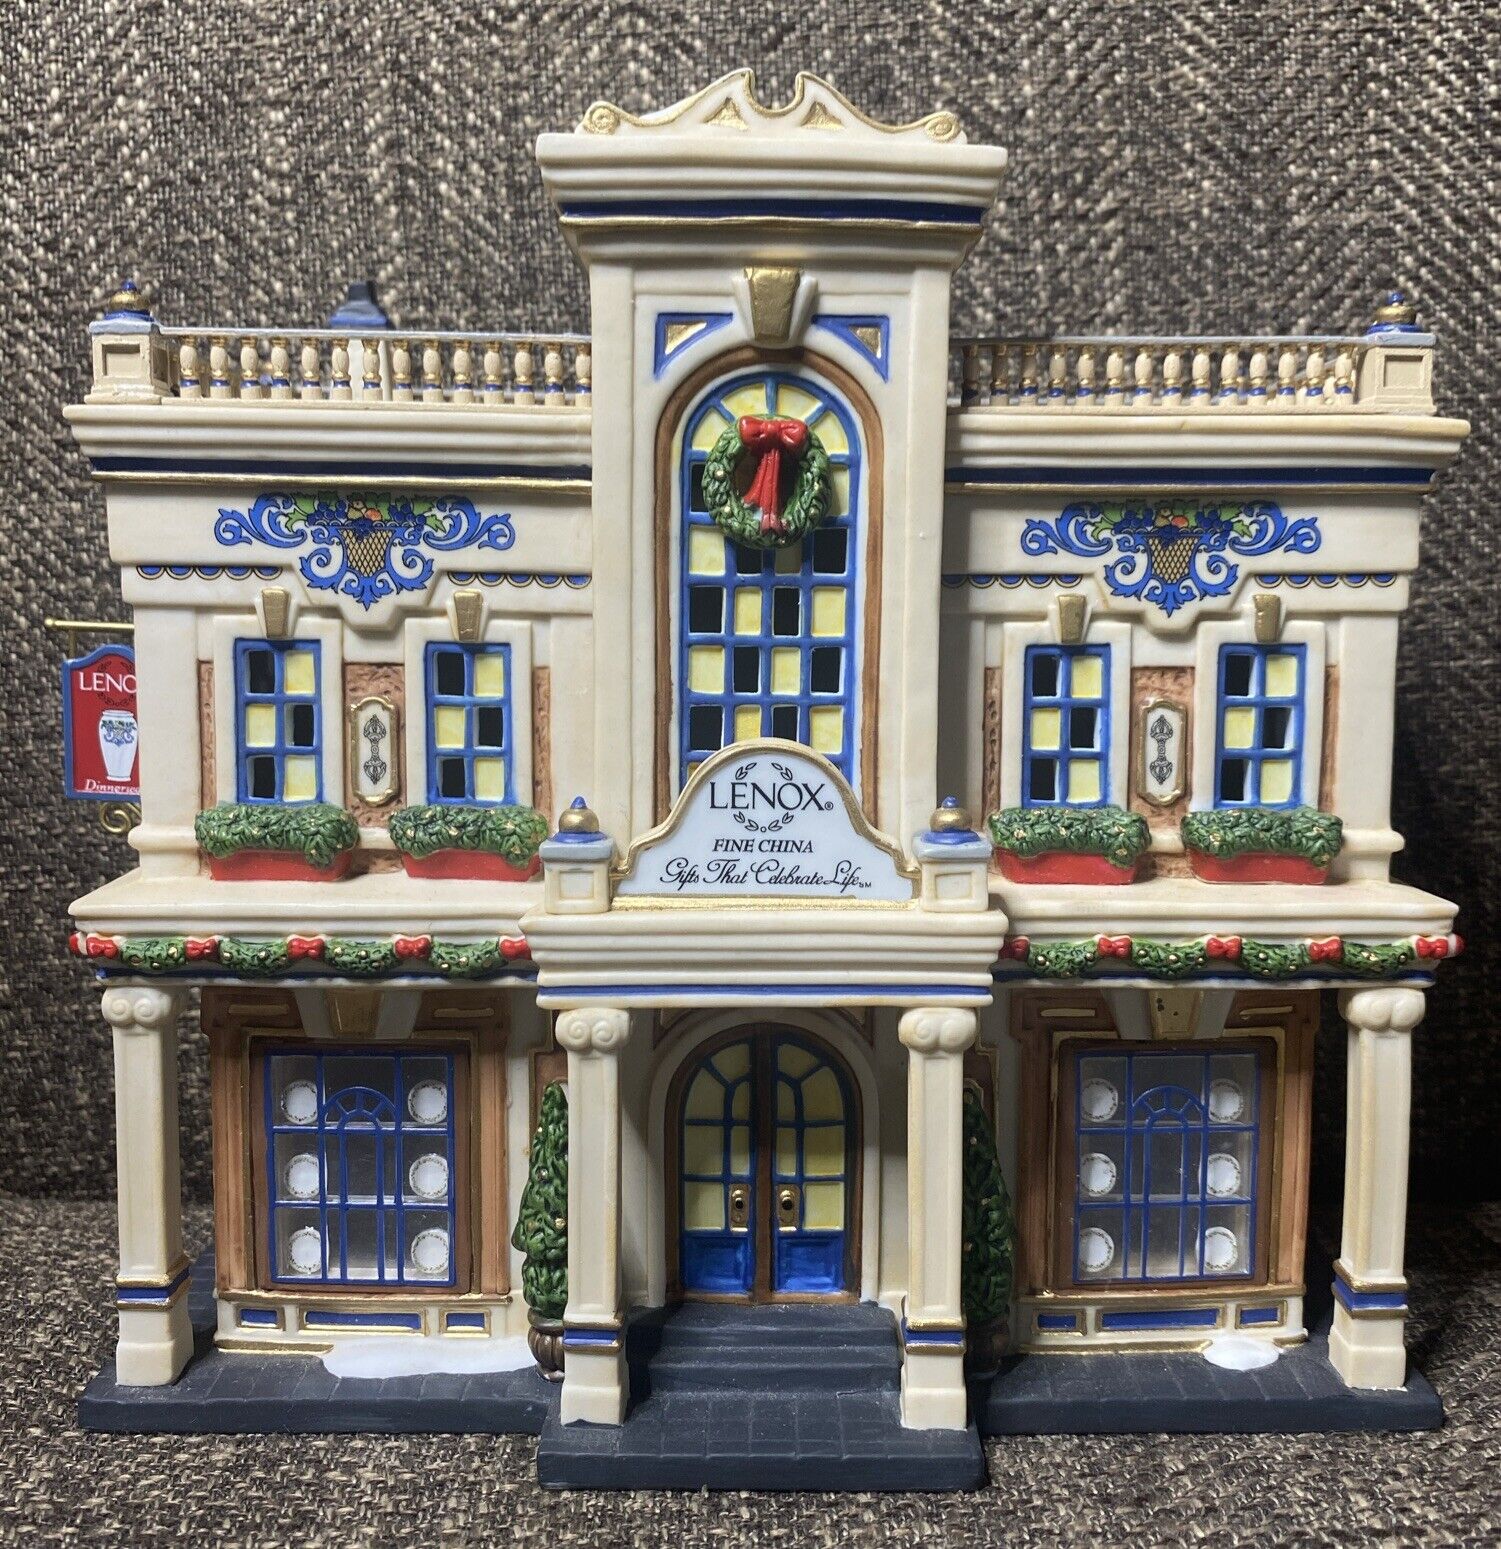 DEPT 56 LENOX CHINA SHOP 59263 Christmas In The City Series Collection Village